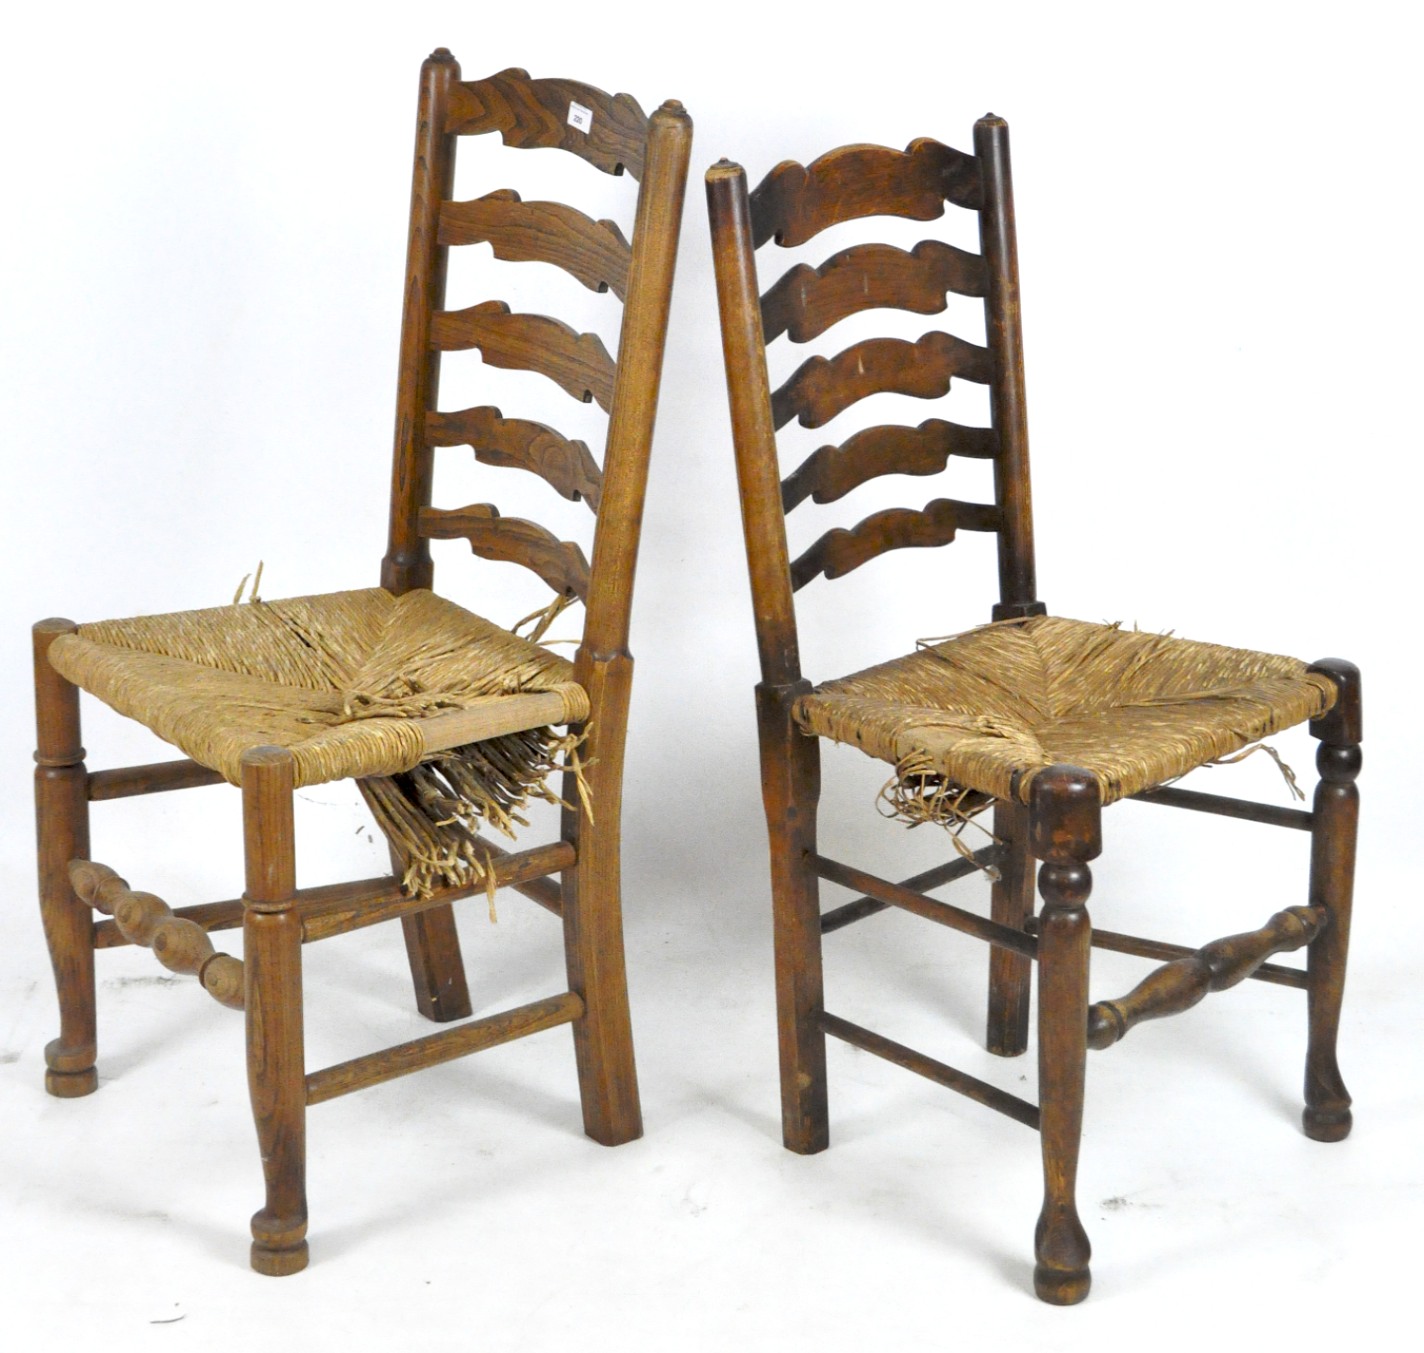 Four 20th century reeded chairs, all with wooden frames, turned bobbin supports and cabriole feet, - Image 2 of 2